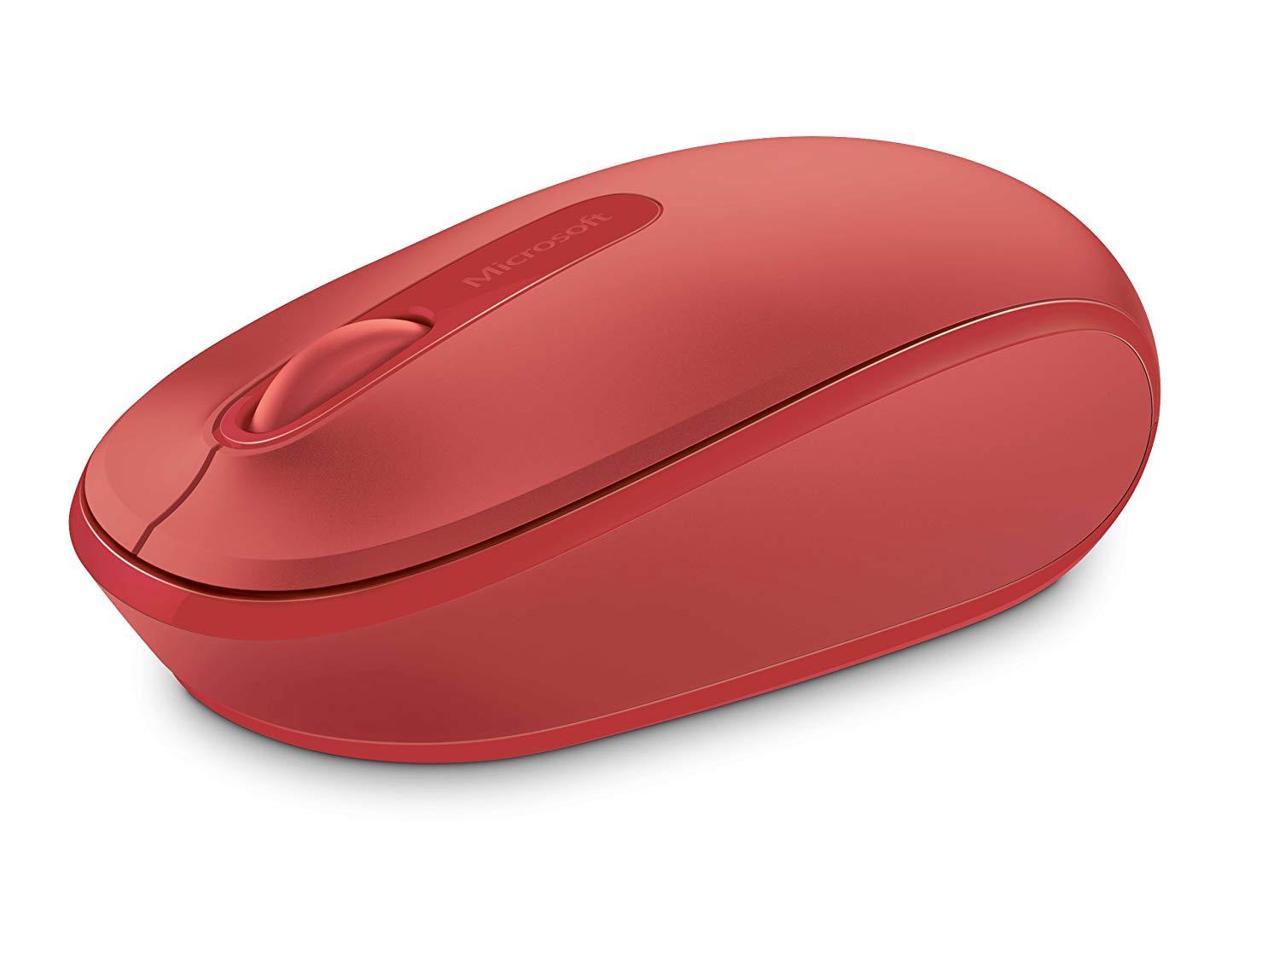 Microsoft Wireless Mobile Mouse 1850 - Flame Red (U7Z-00031) - image 5 of 20